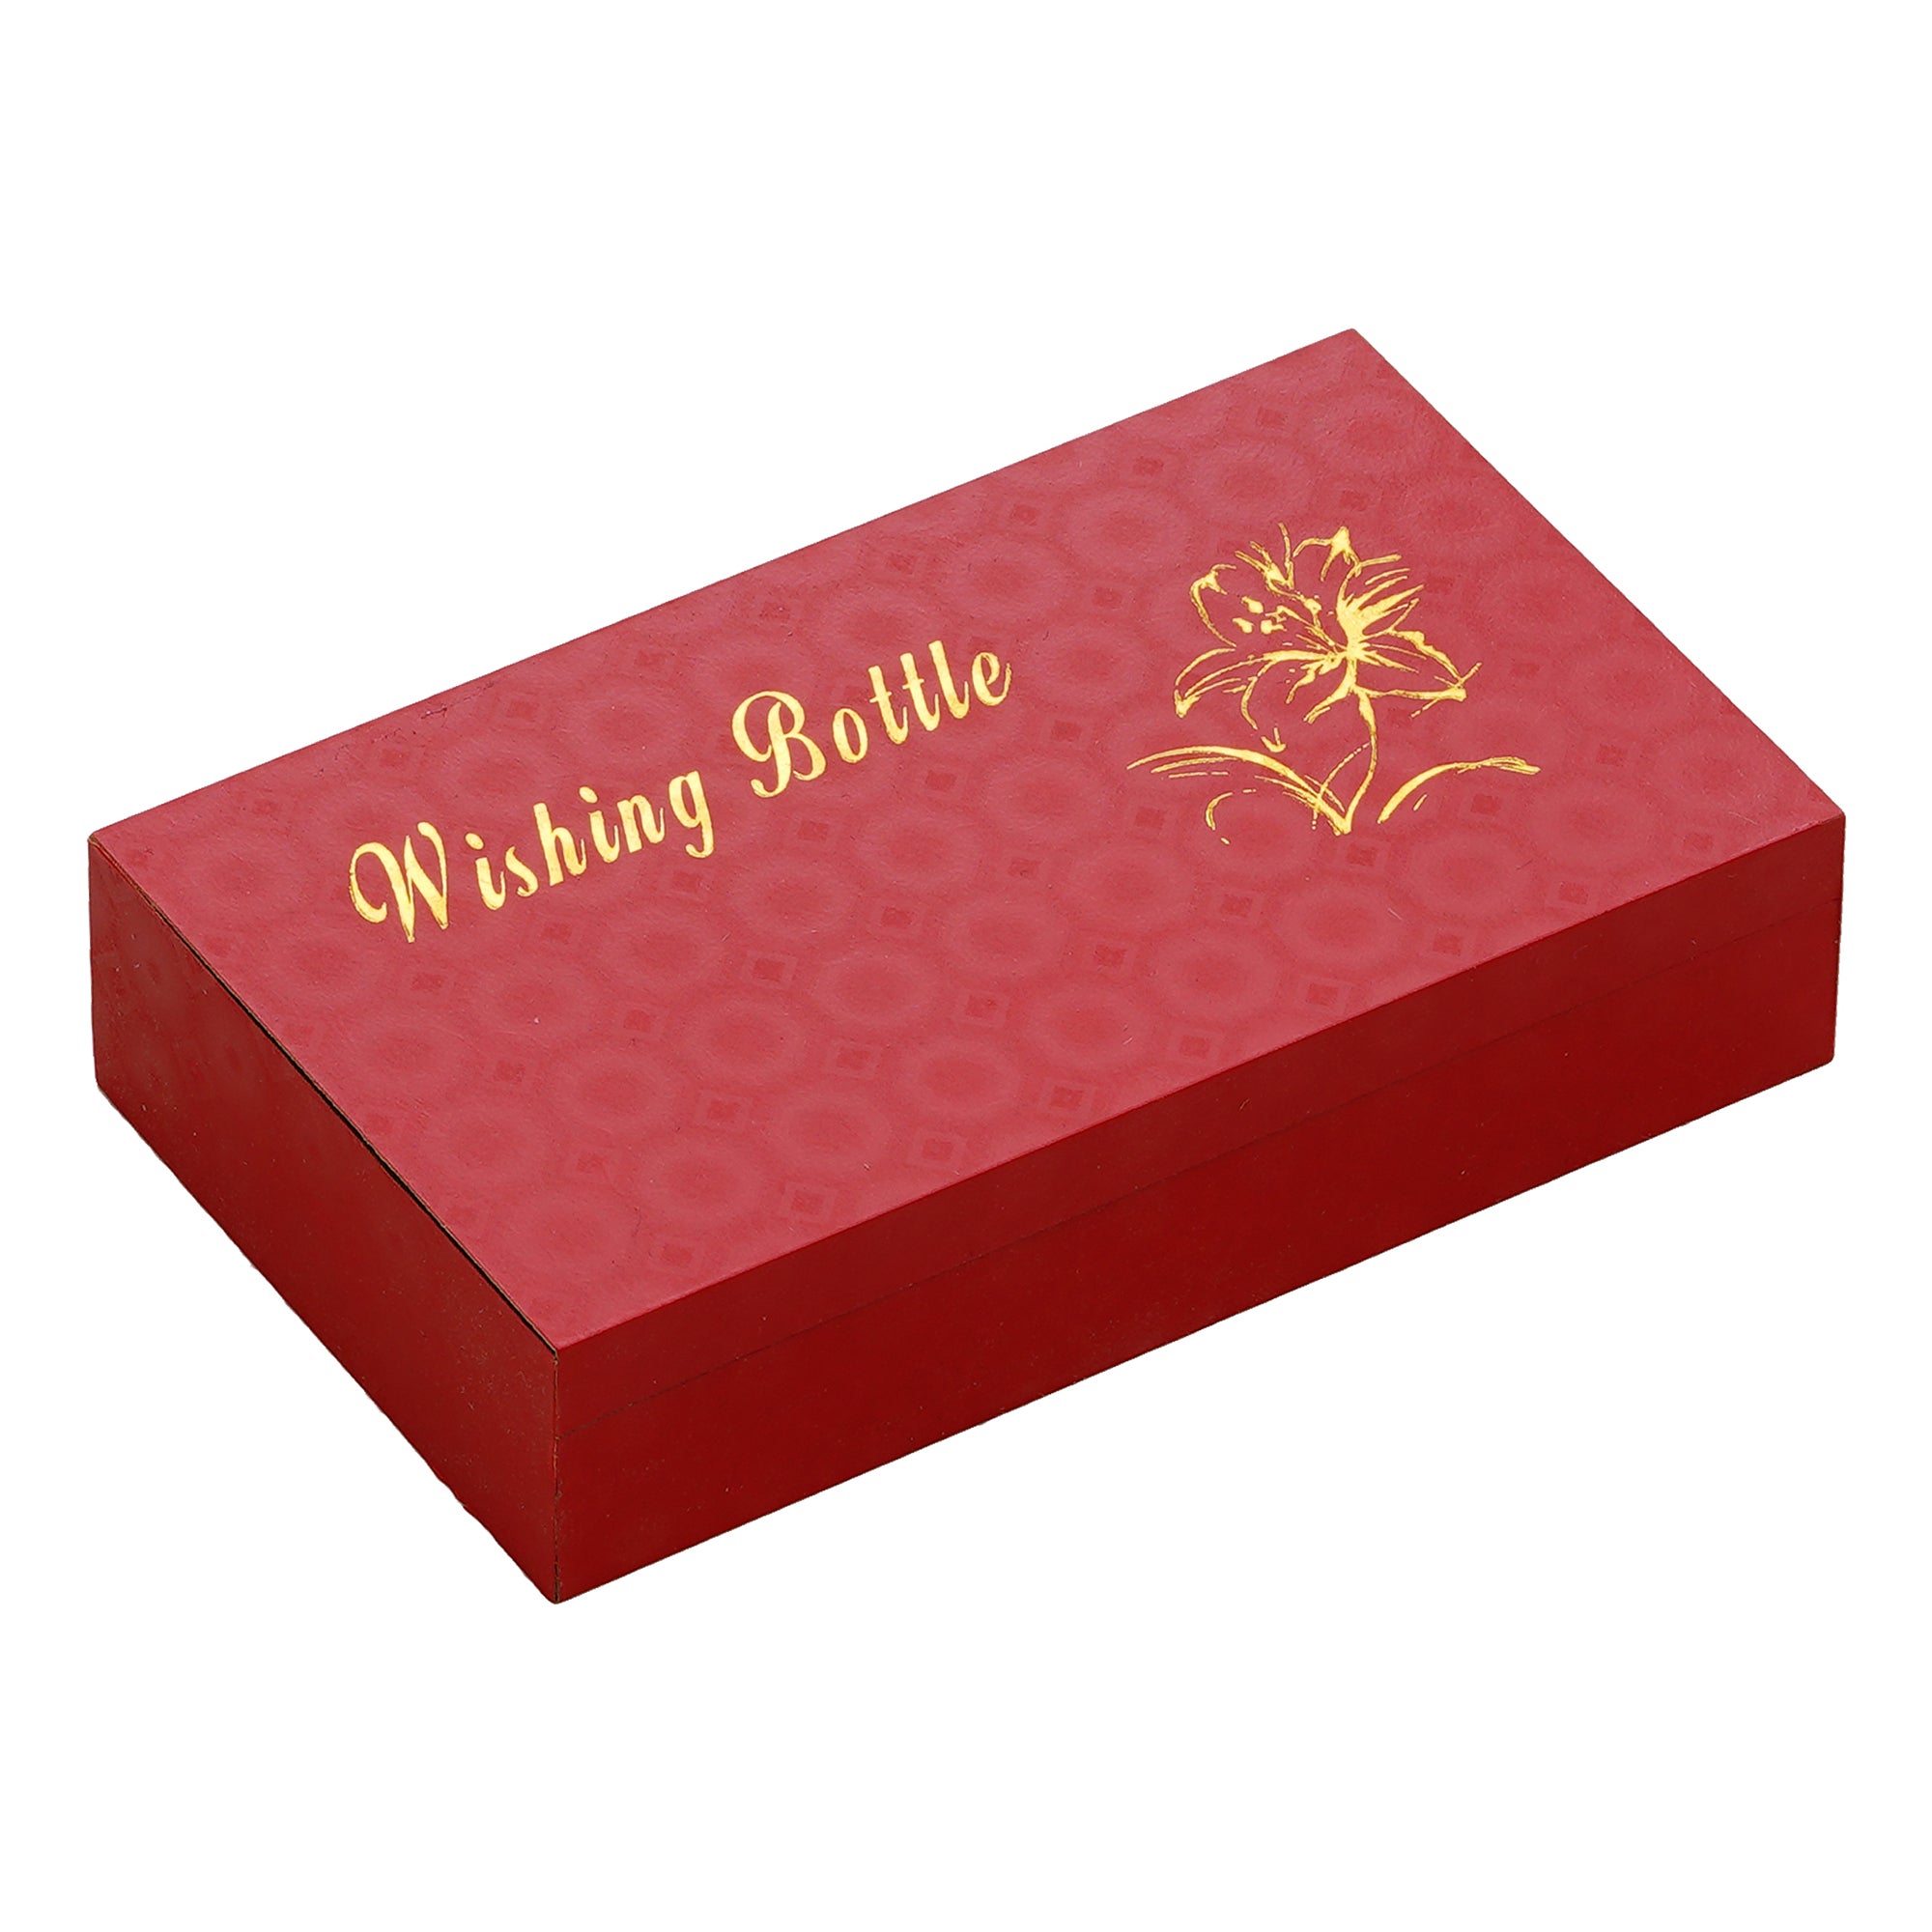 Set Of 6 Personal Messages Greeting Bottles In Wooden Box "For You" Red Decorative Bottle 4